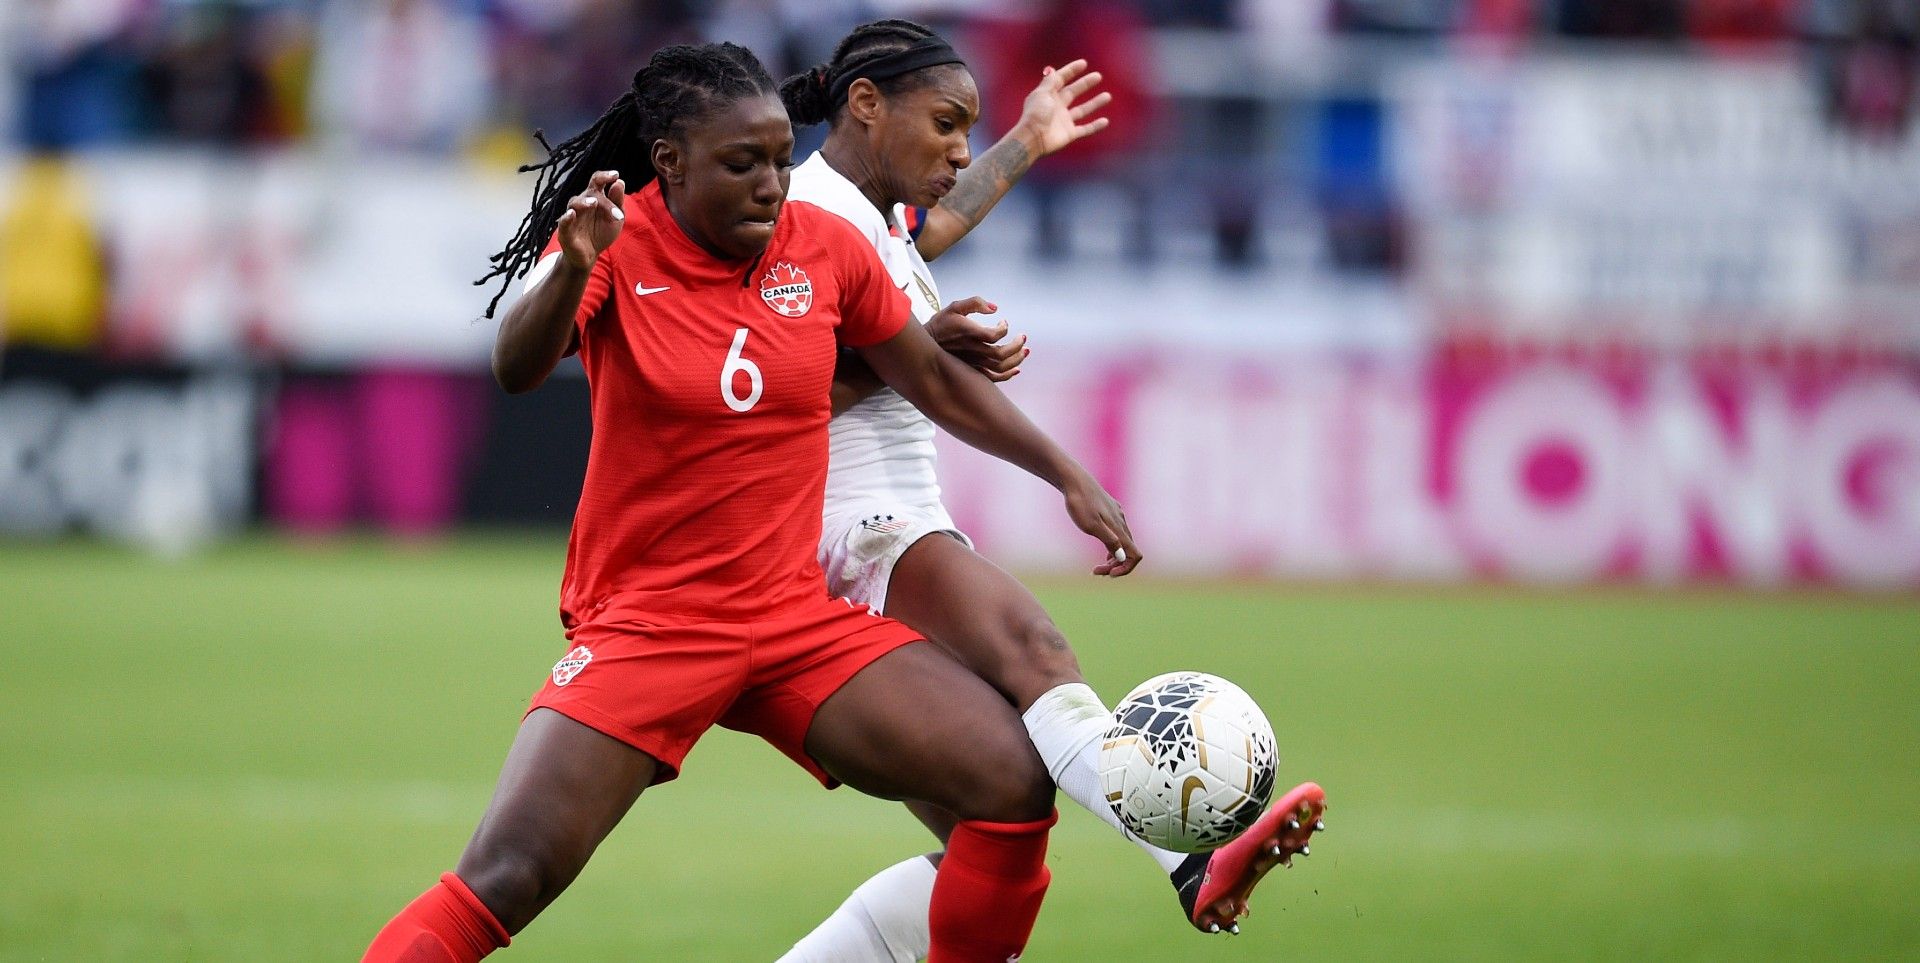 Canadian Deanne Rose living out a dream playing in England's FA WSL